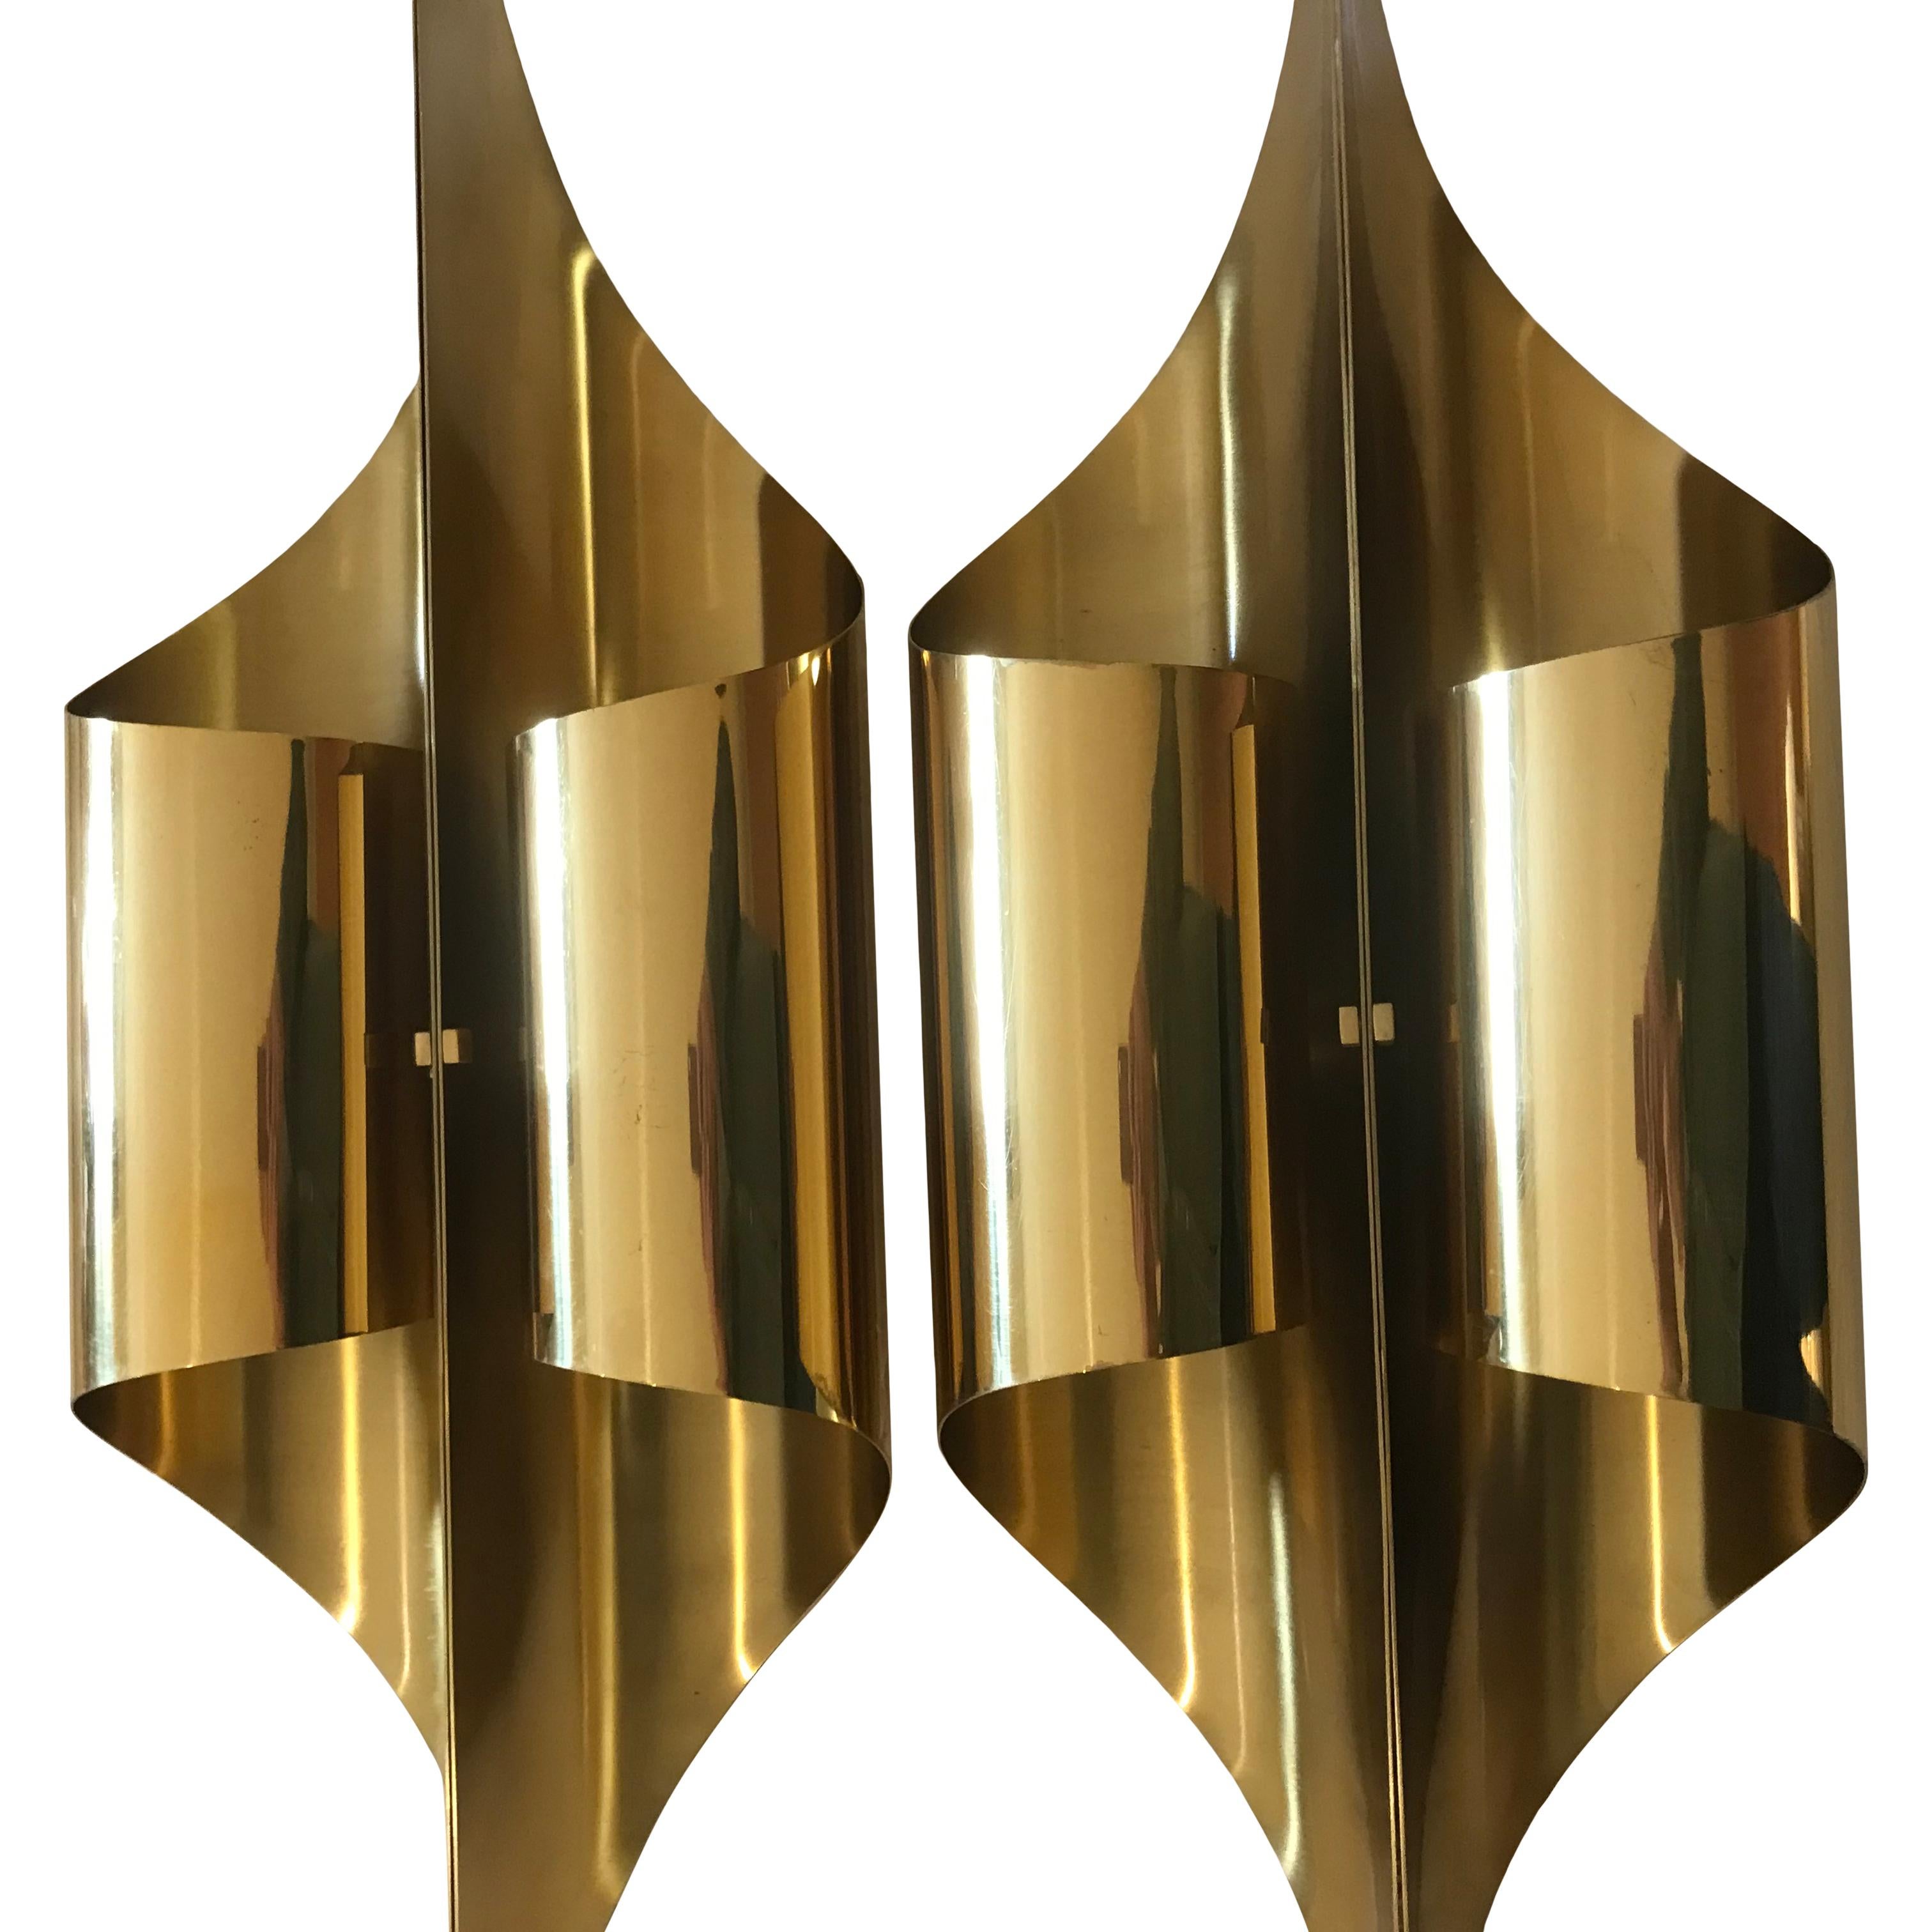 French Maison Charles Espadon Wall Sconce in Shiny and Matt Gold, Inox Collection For Sale